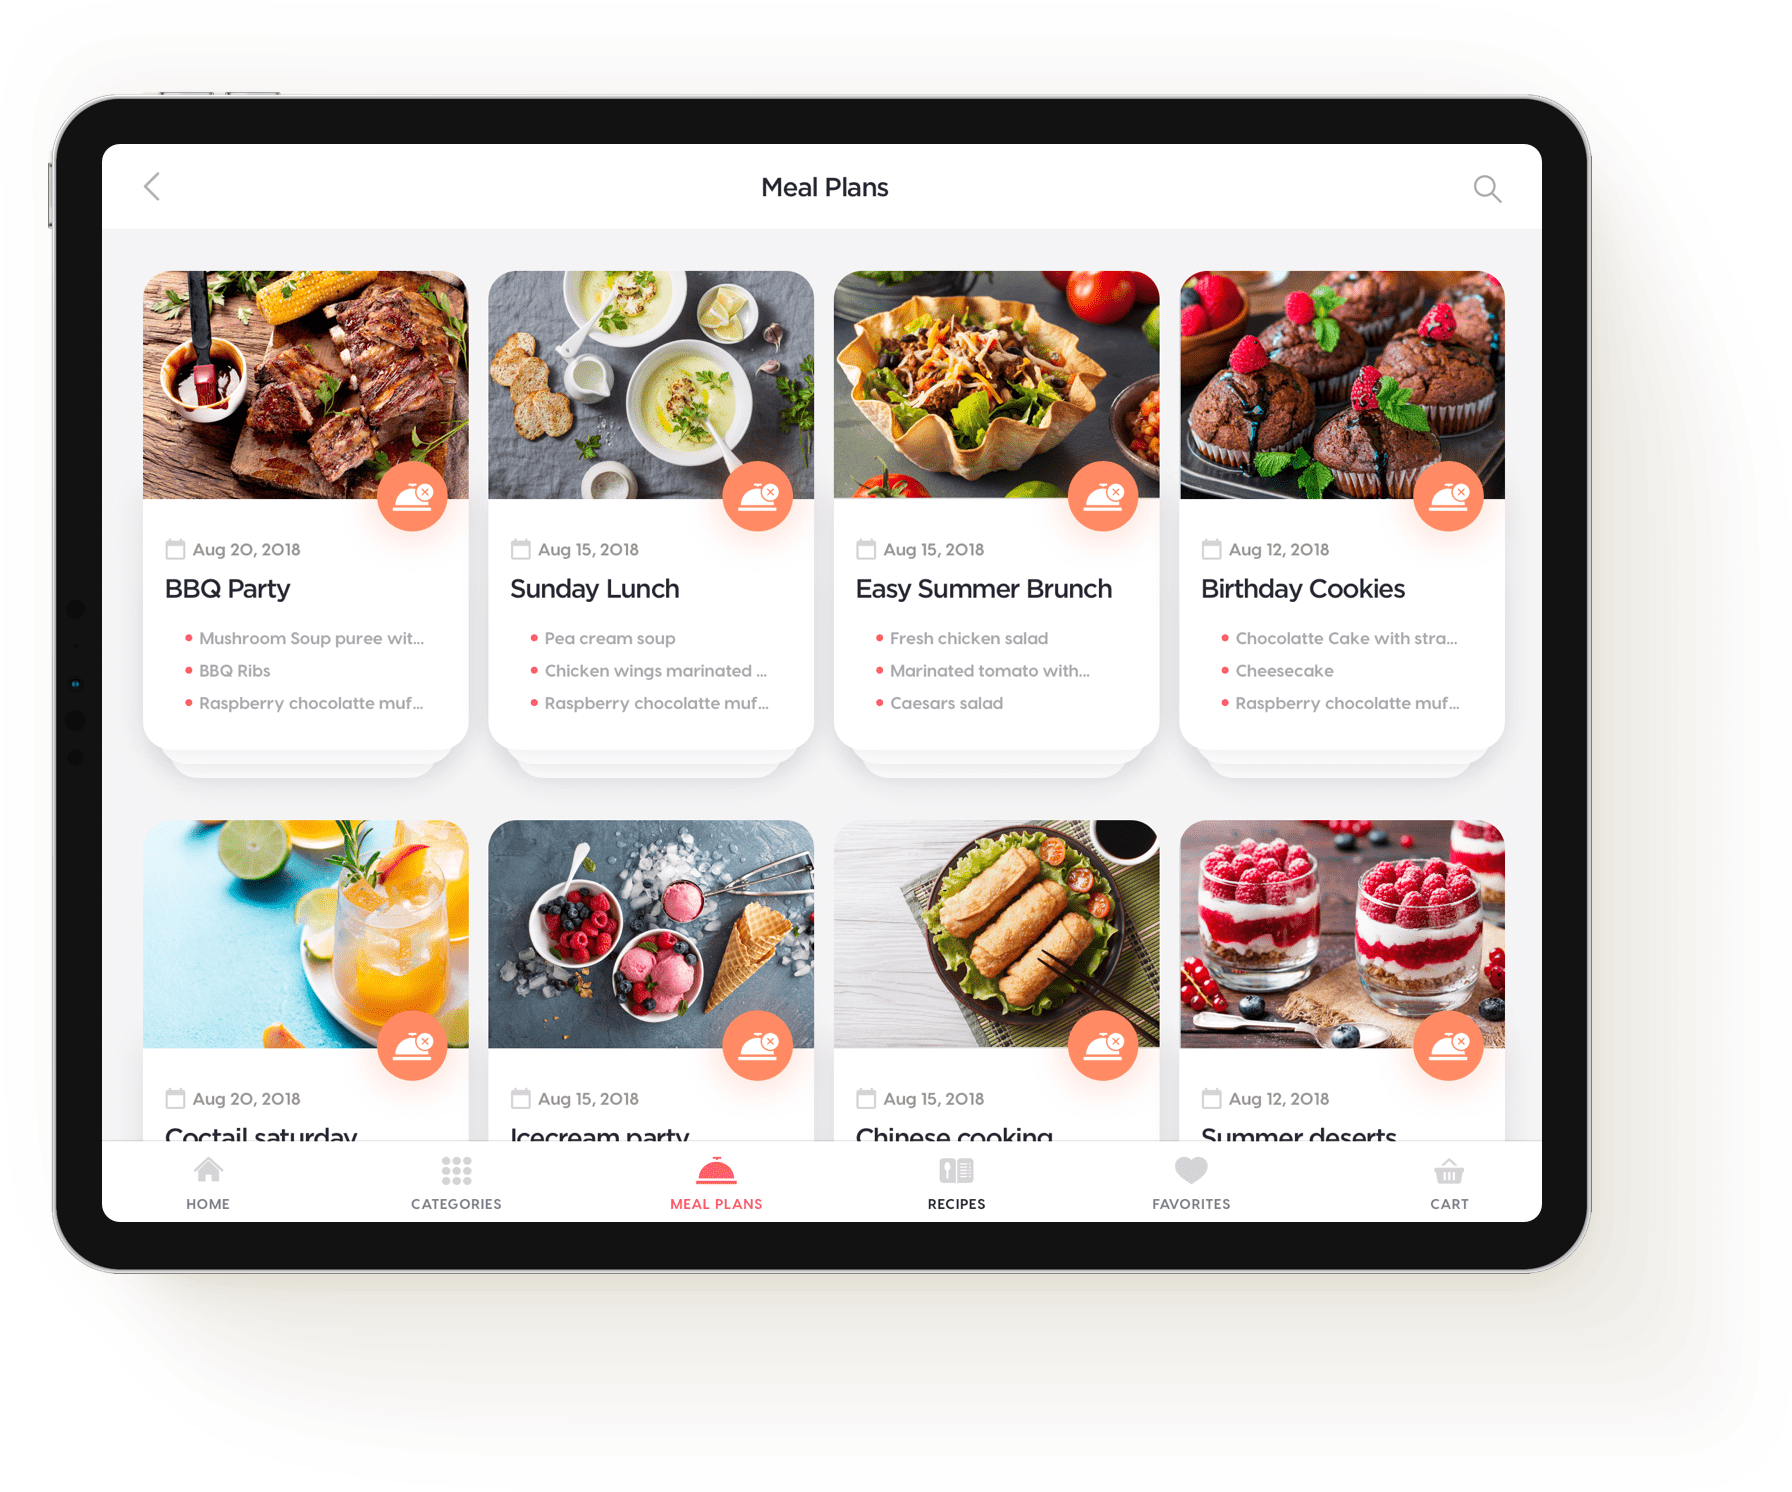 Yummy recipes meal plans